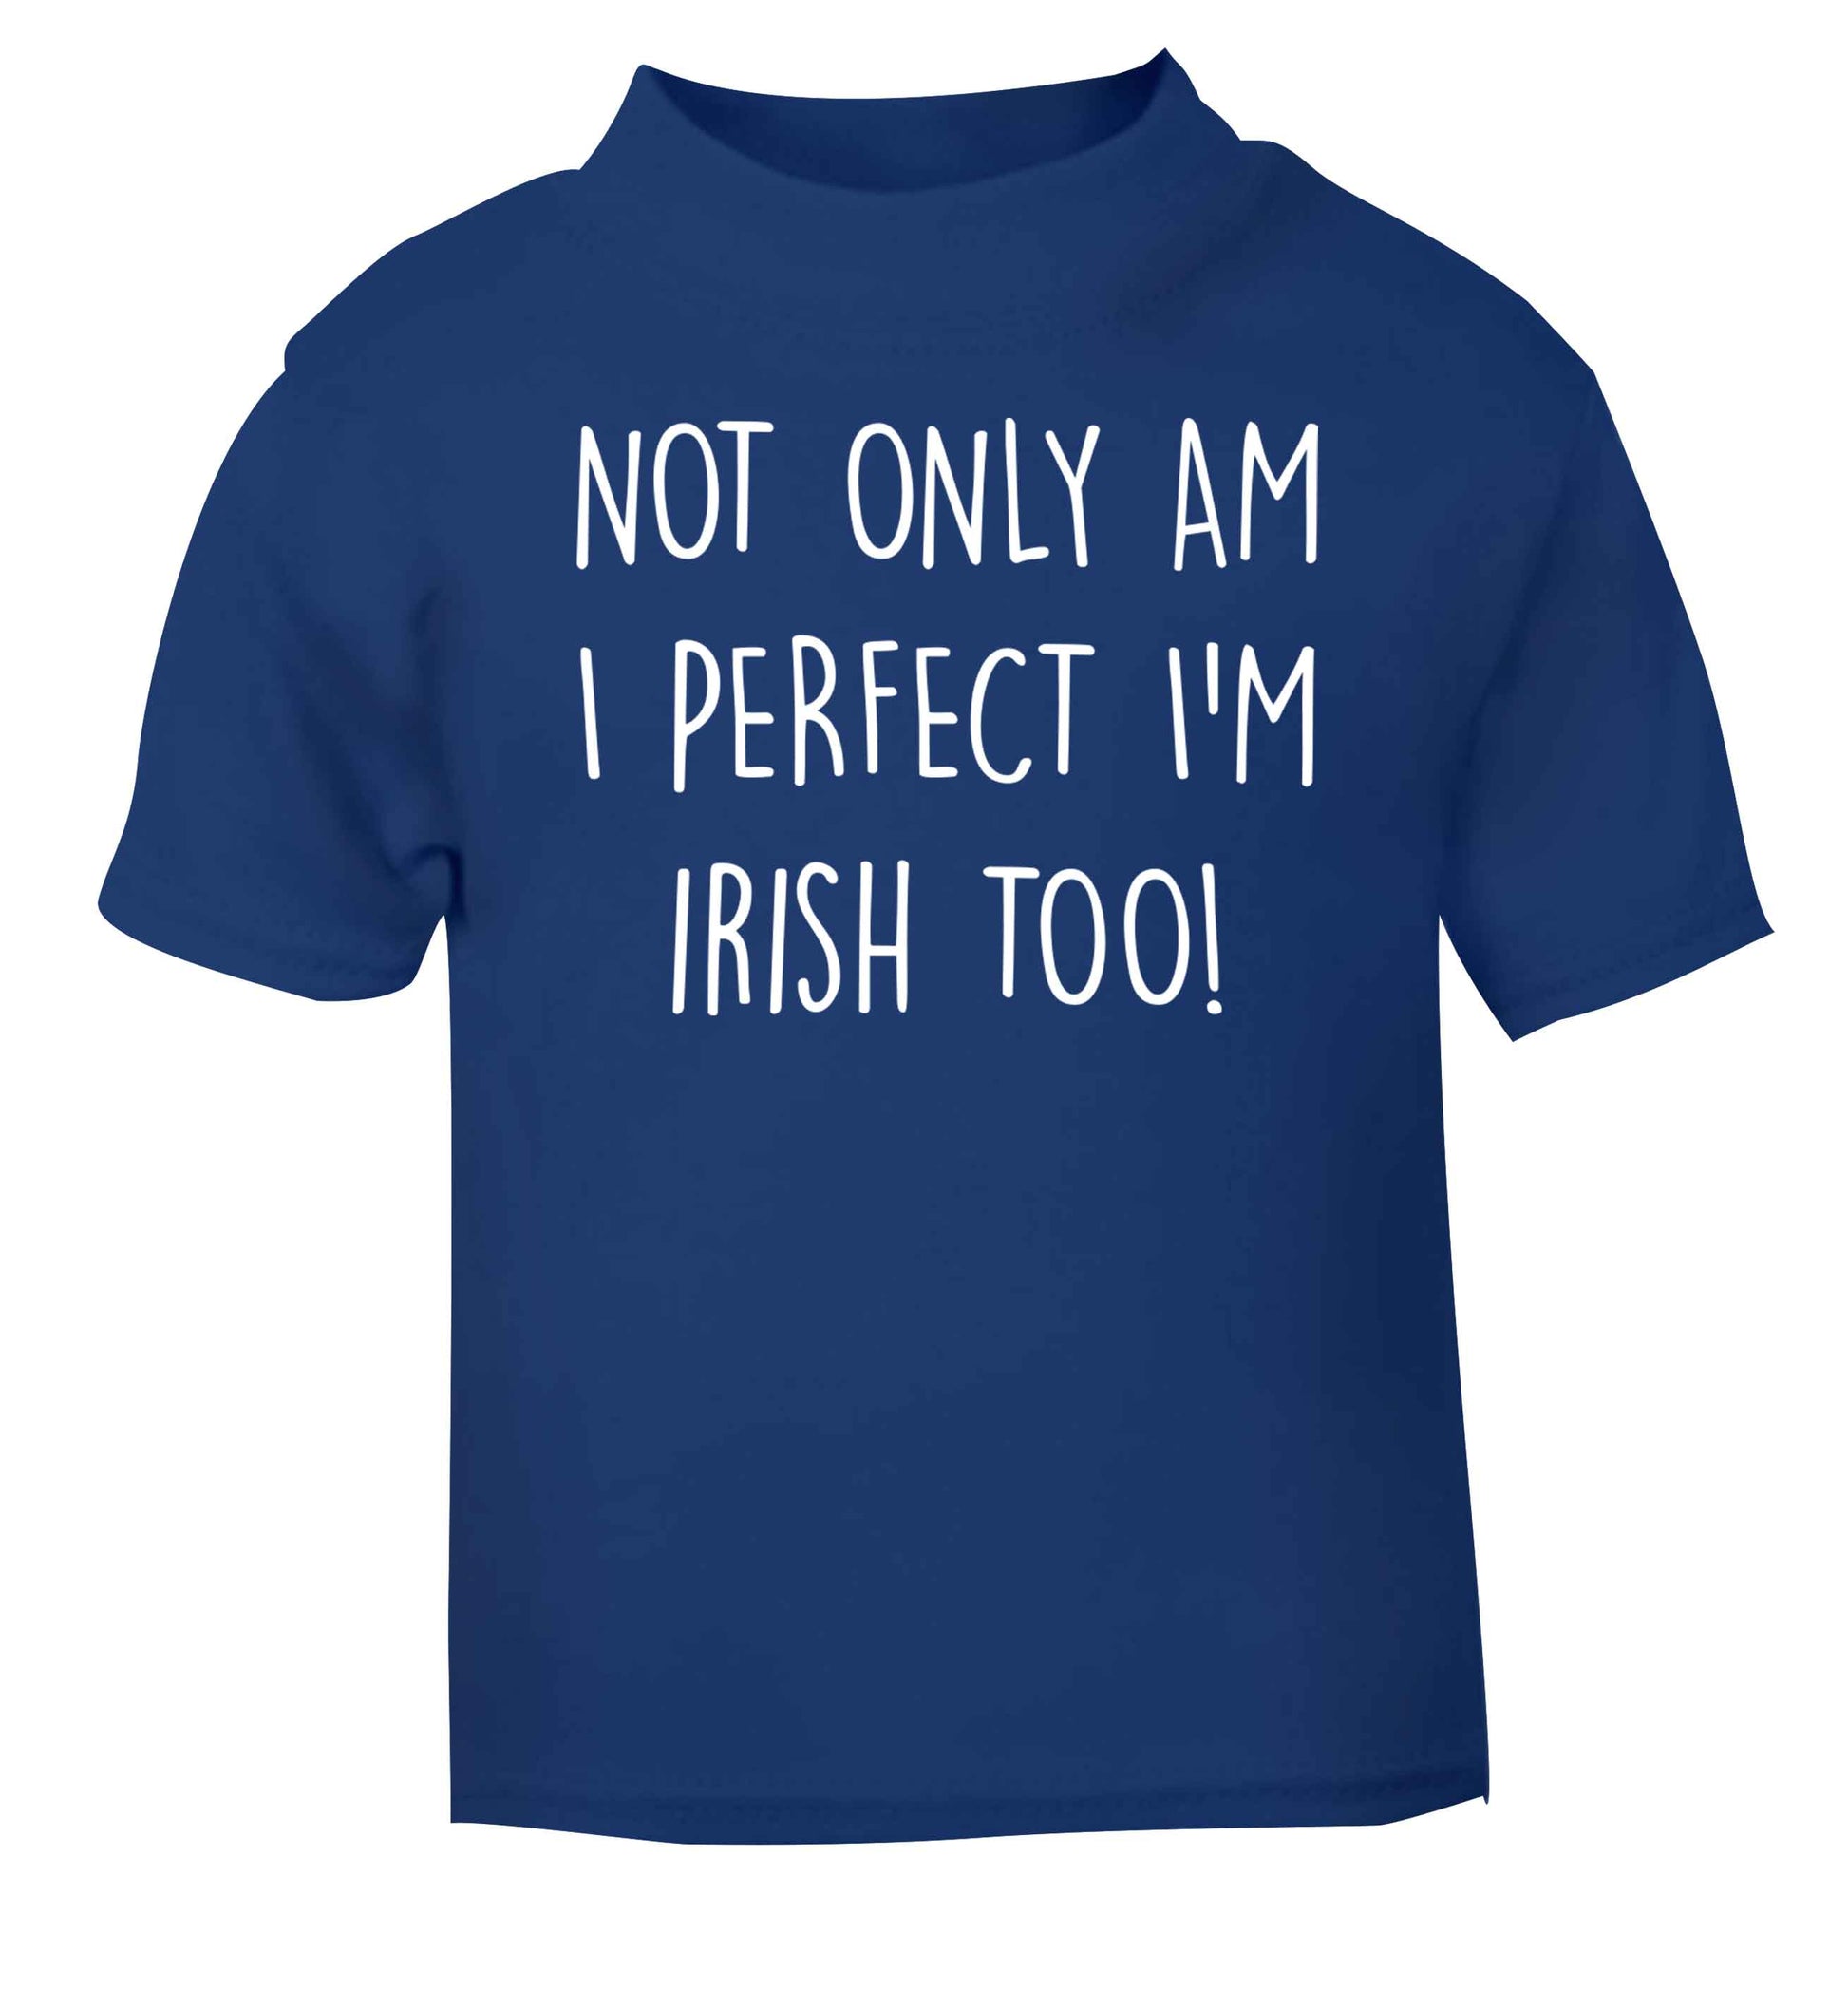 Not only am I perfect I'm Irish too! blue baby toddler Tshirt 2 Years